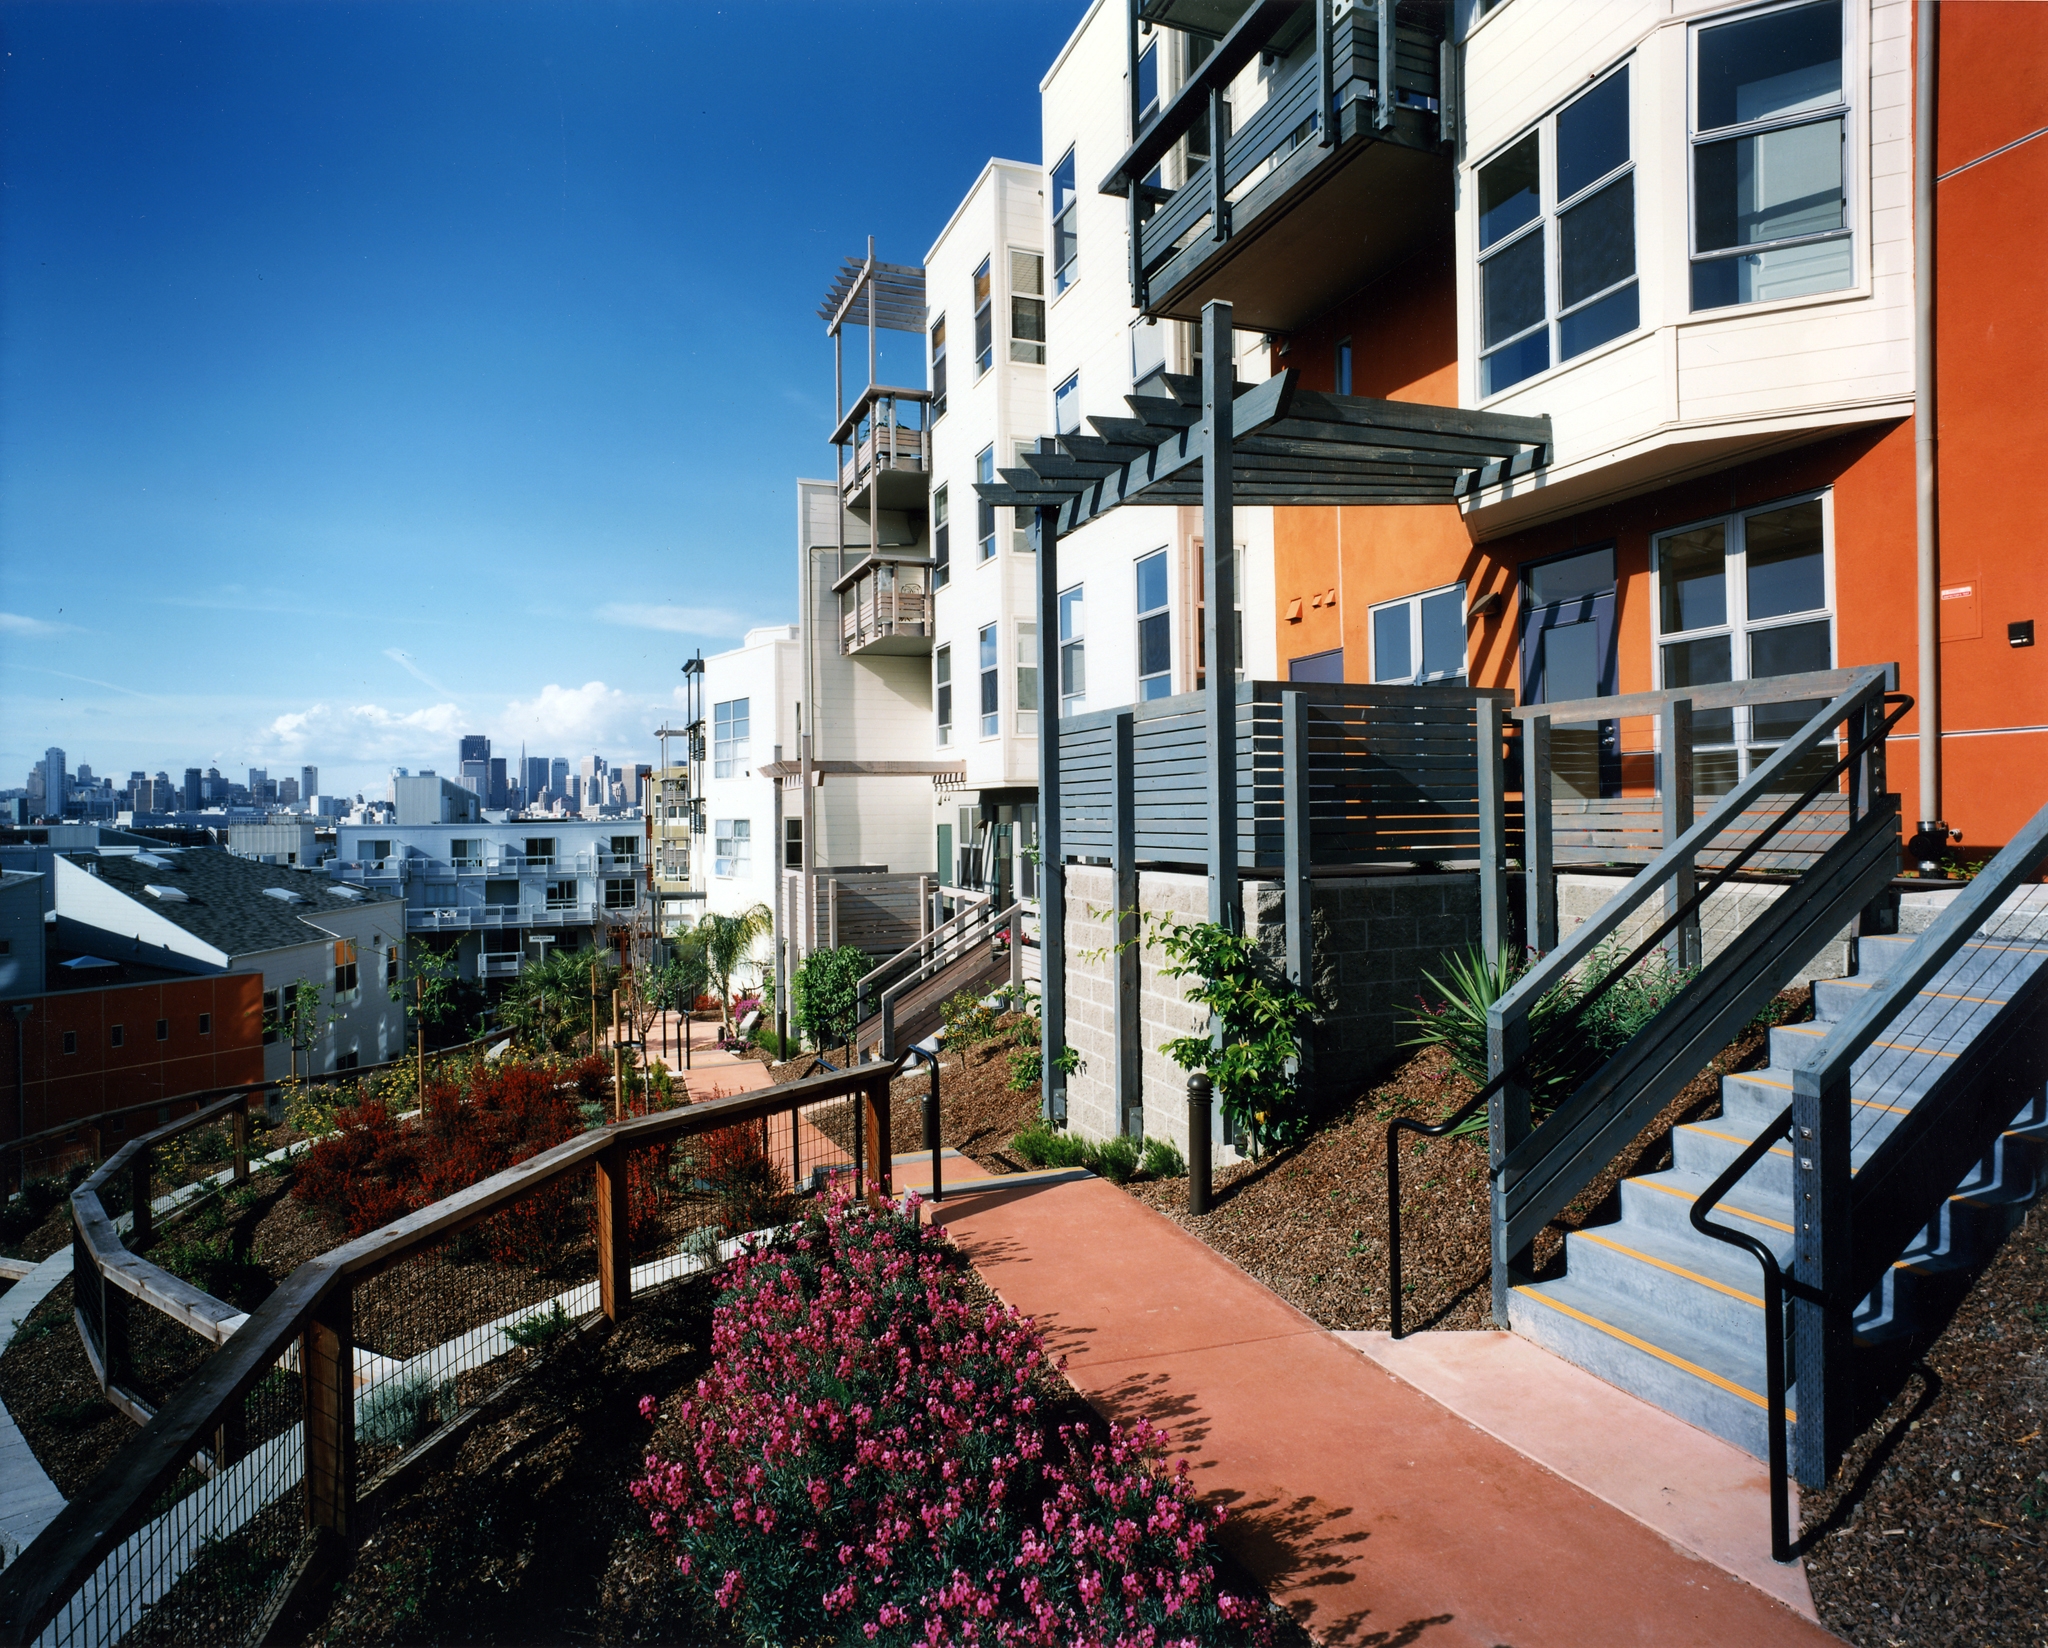 Courtyard with a view of downtown at 18th & Arkansas/g2 Lofts in San Francisco.